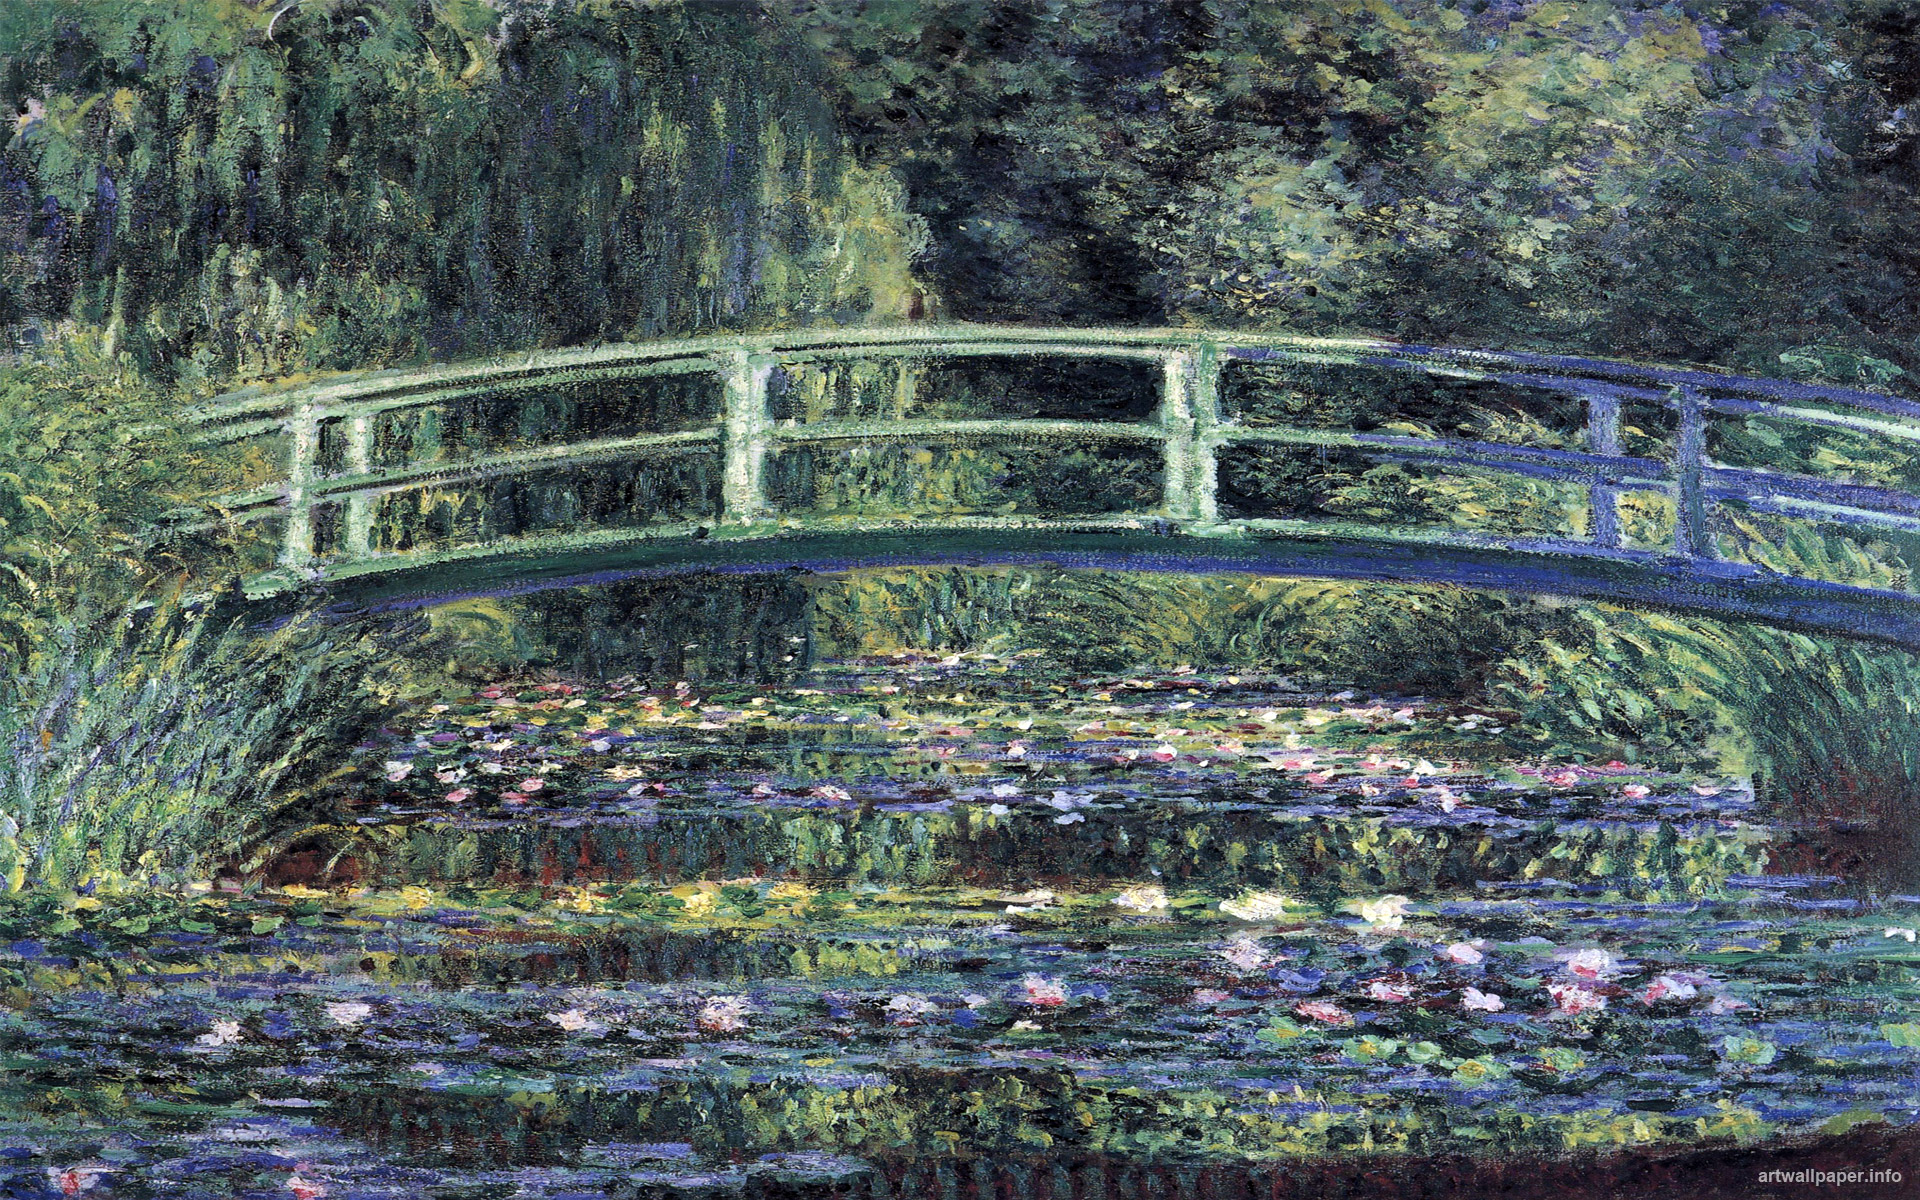 Download free image of Monet iPhone wallpaper phone background Water Lilies  famous painting by The Metropolitan Museum of Art Source about claude monet  iphone wallpaper monet paintings landscape painting and impressionism  3933712